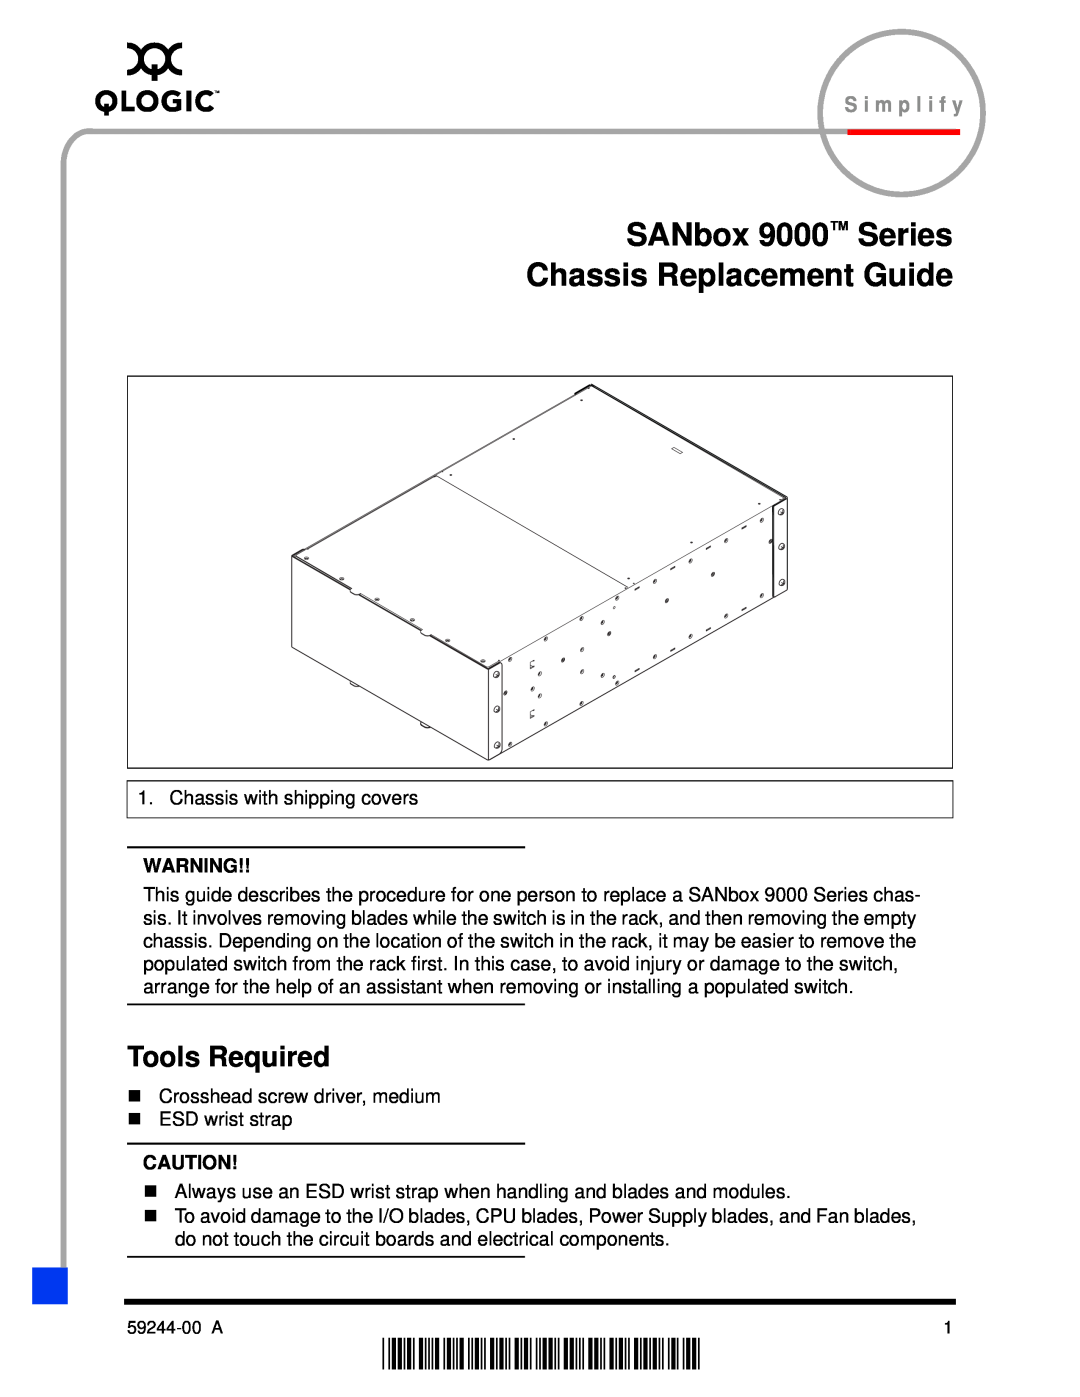 Q-Logic 59244-00 A manual Tools Required, SANbox 9000 Series Chassis Replacement Guide, S i m p l i f y 